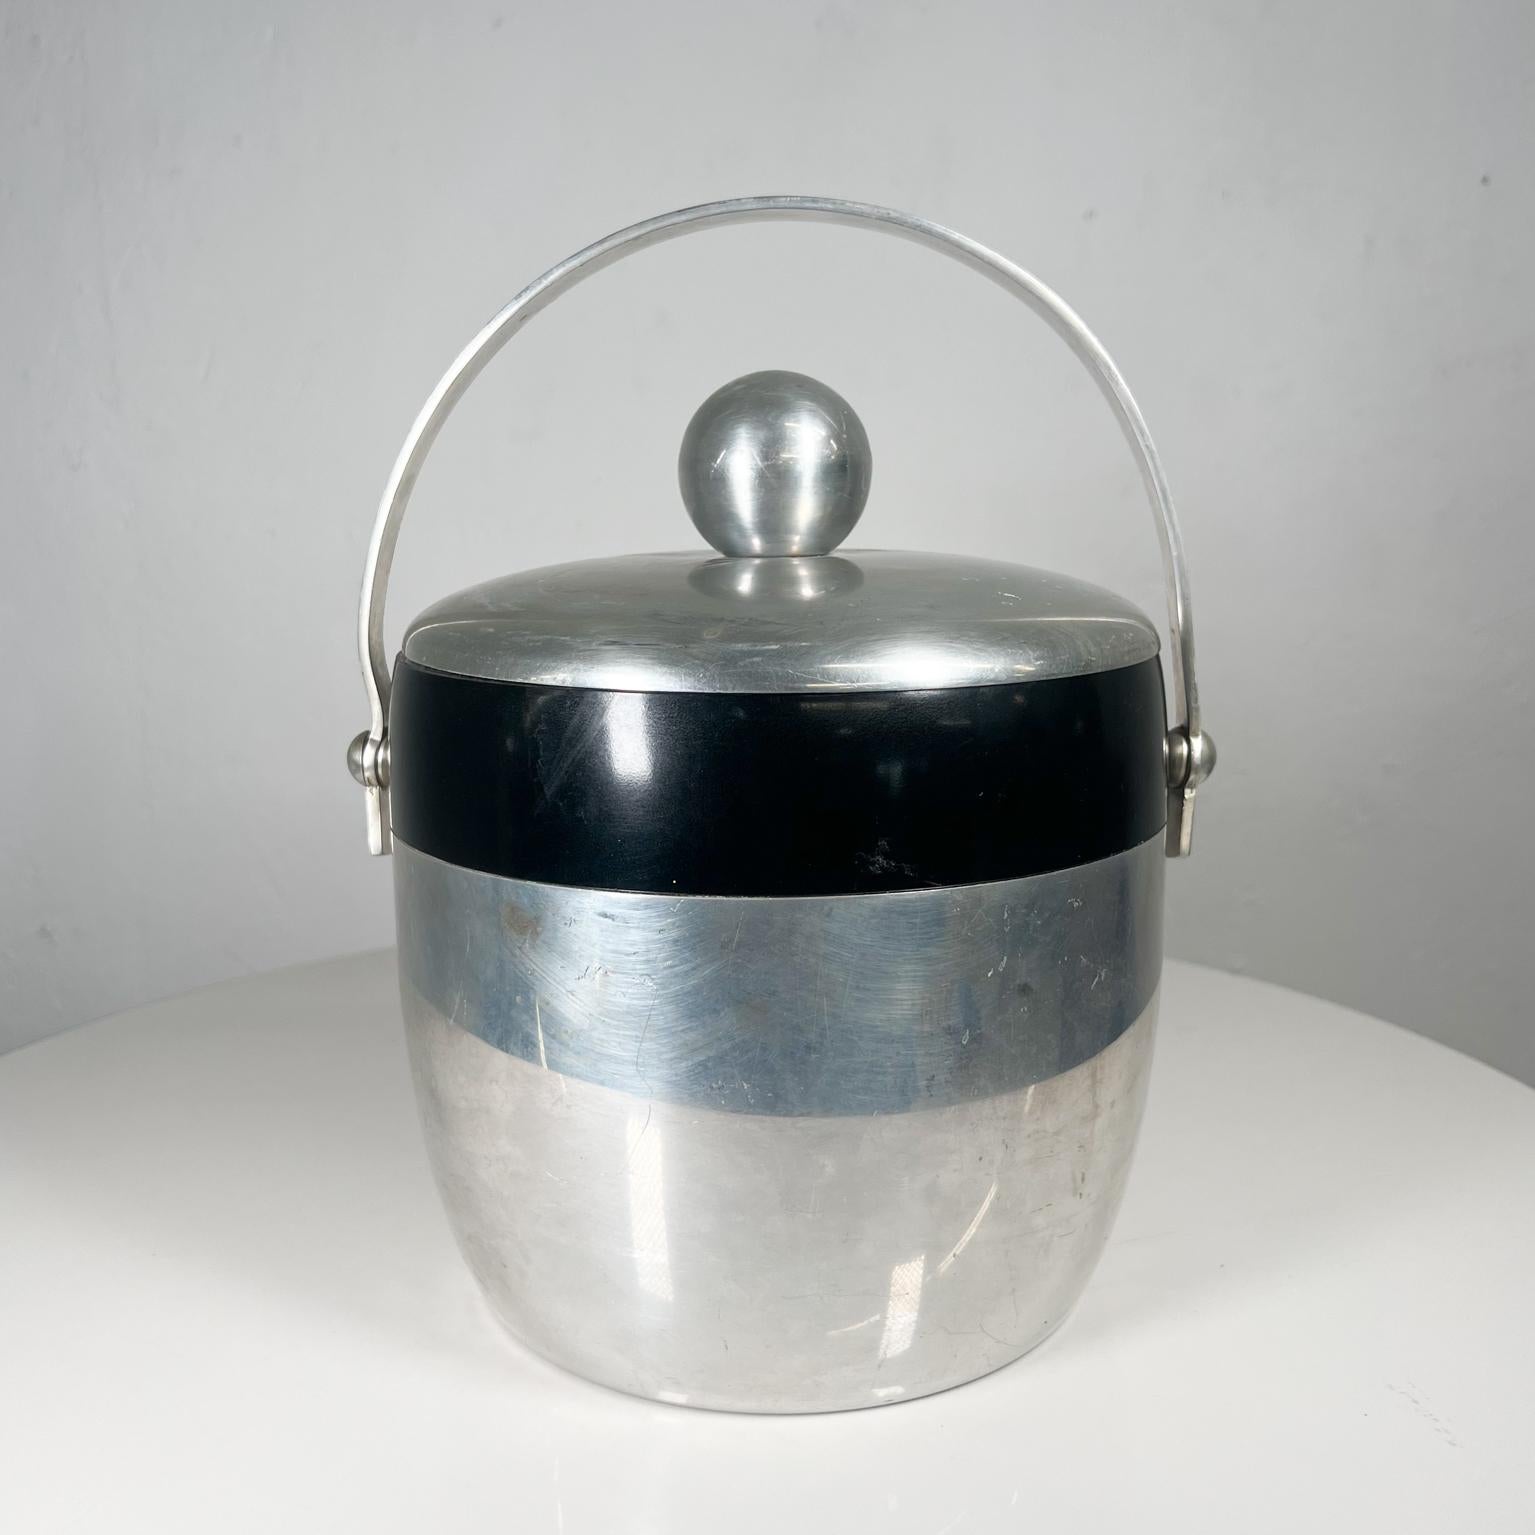 1950s Kromex ice bucket atomic silver and black
Enduringly beautiful in Aluminum
Measures: 9.5 tall 11.5 tall with handle x 7.75 diameter
Preowned vintage condition.
Refer to images listed please.